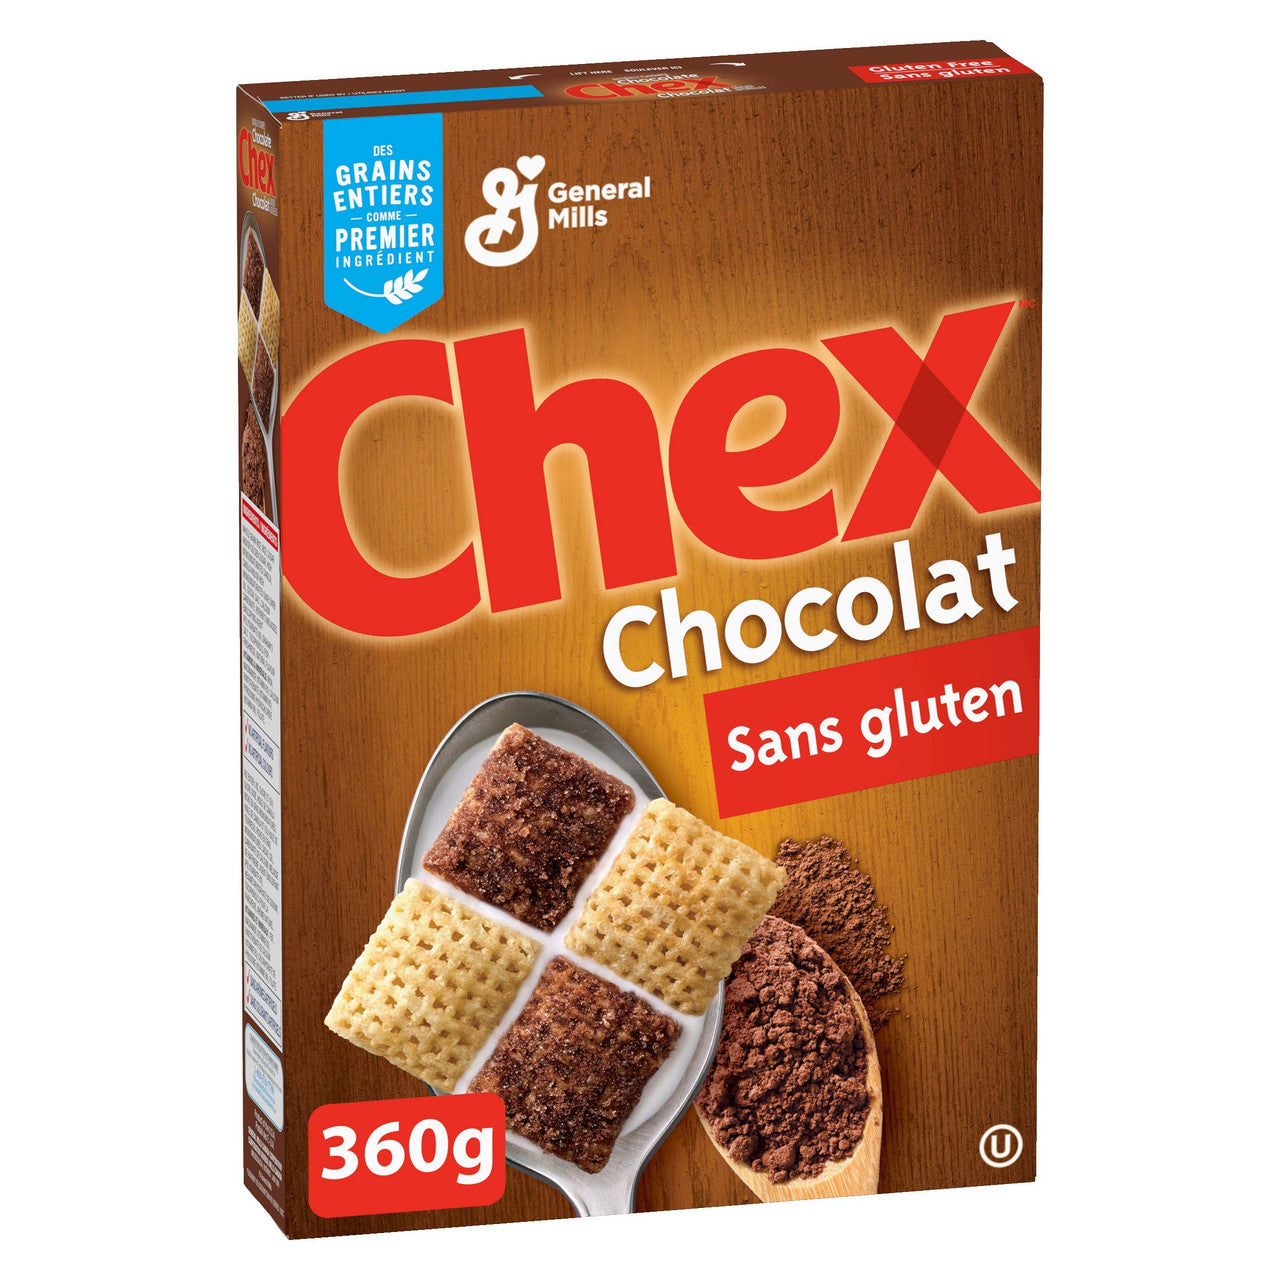 Chex Gluten Free Chocolate Cereal, 360g/12.7oz, (Imported from Canada)